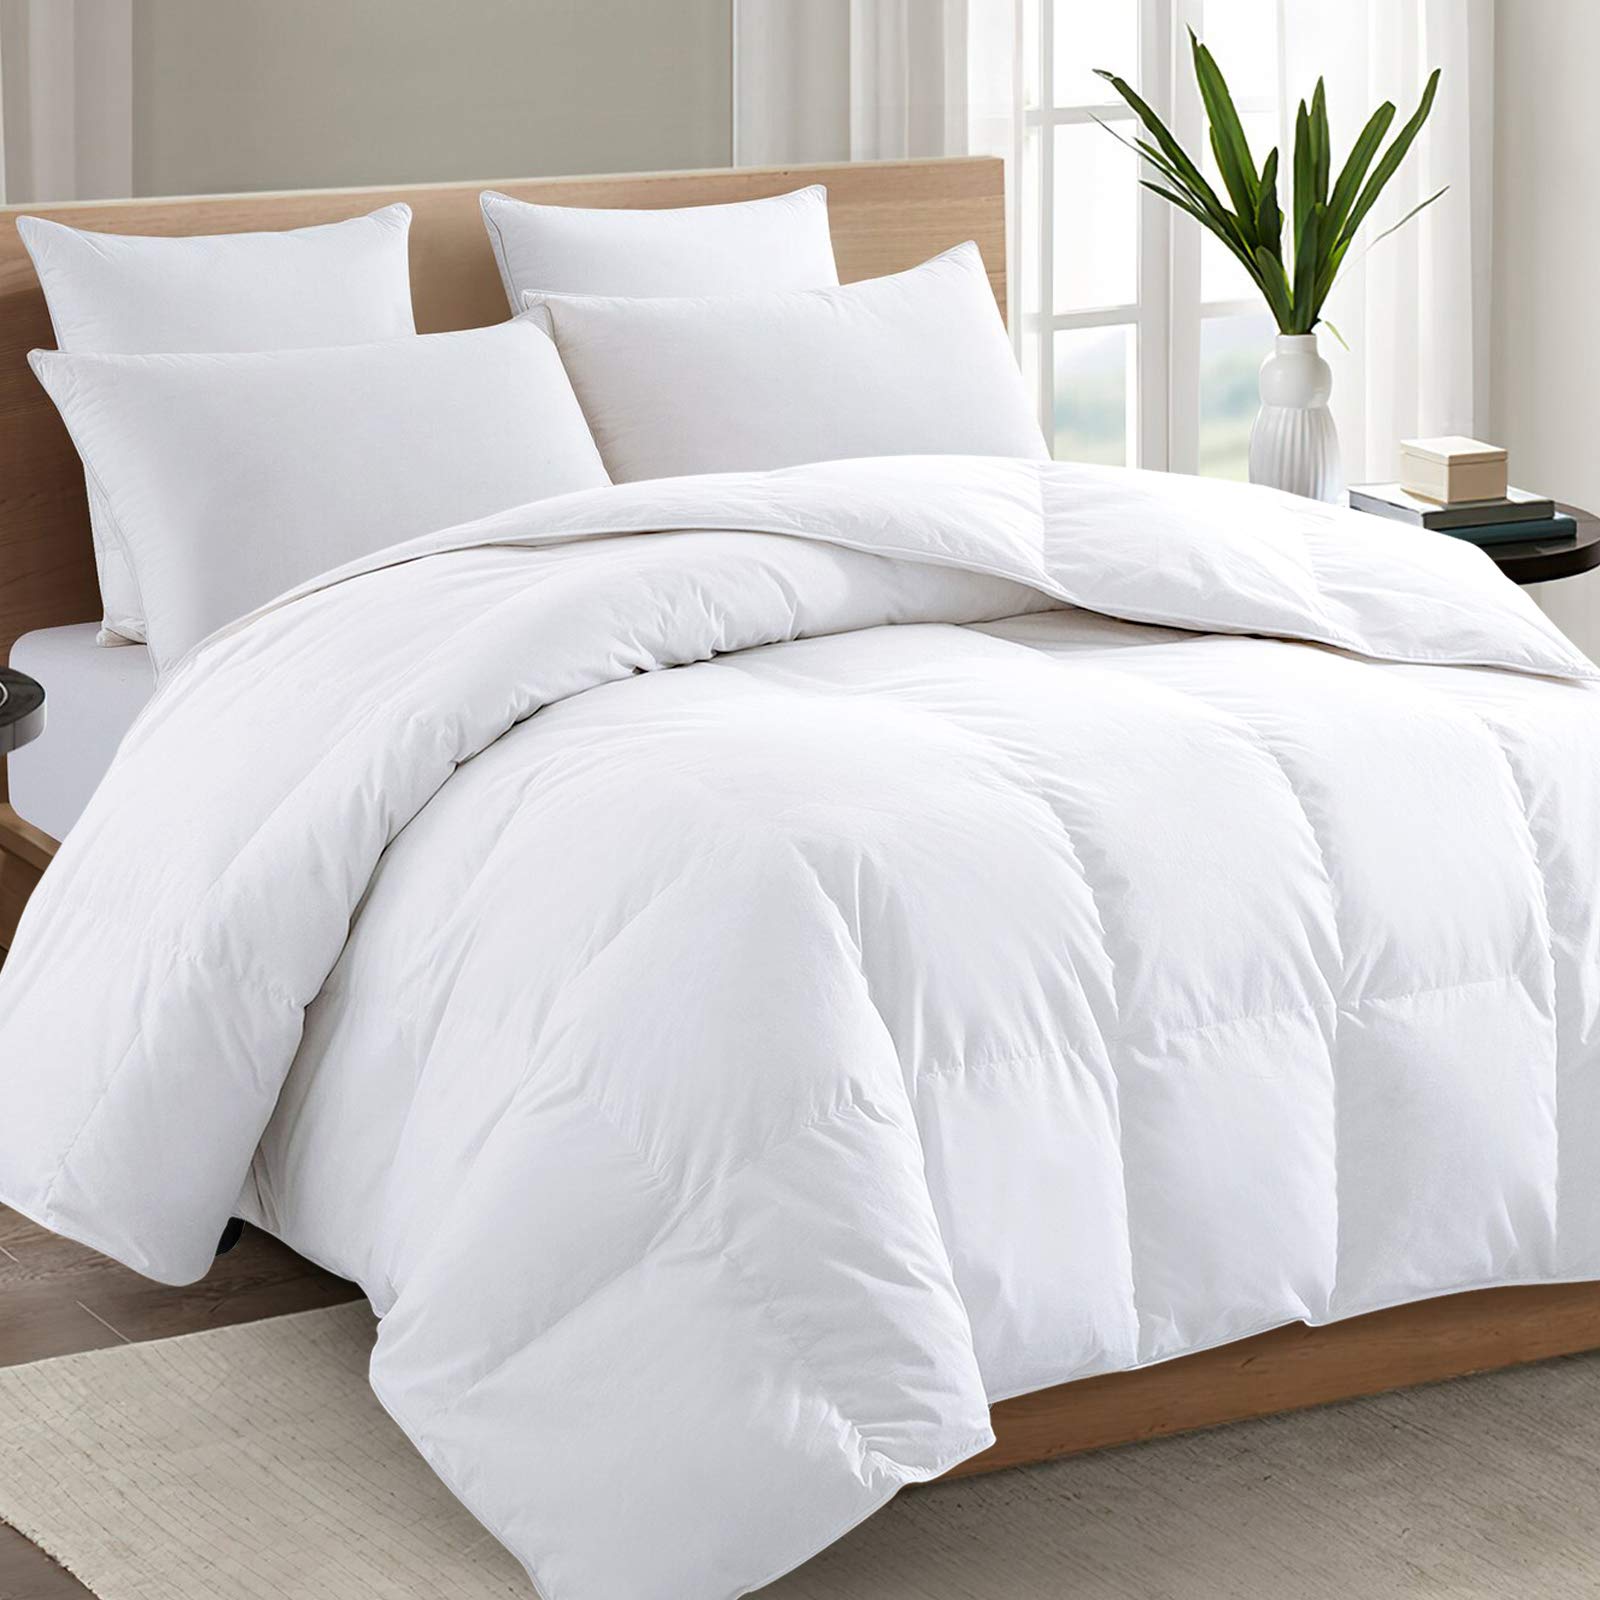 CozyLux Twin Bed in a Bag White Seersucker Textured Comforter Set with  Sheets 5-Pieces for Girls and Boys - Bedding Sets with Comforter, Pillow  Sham